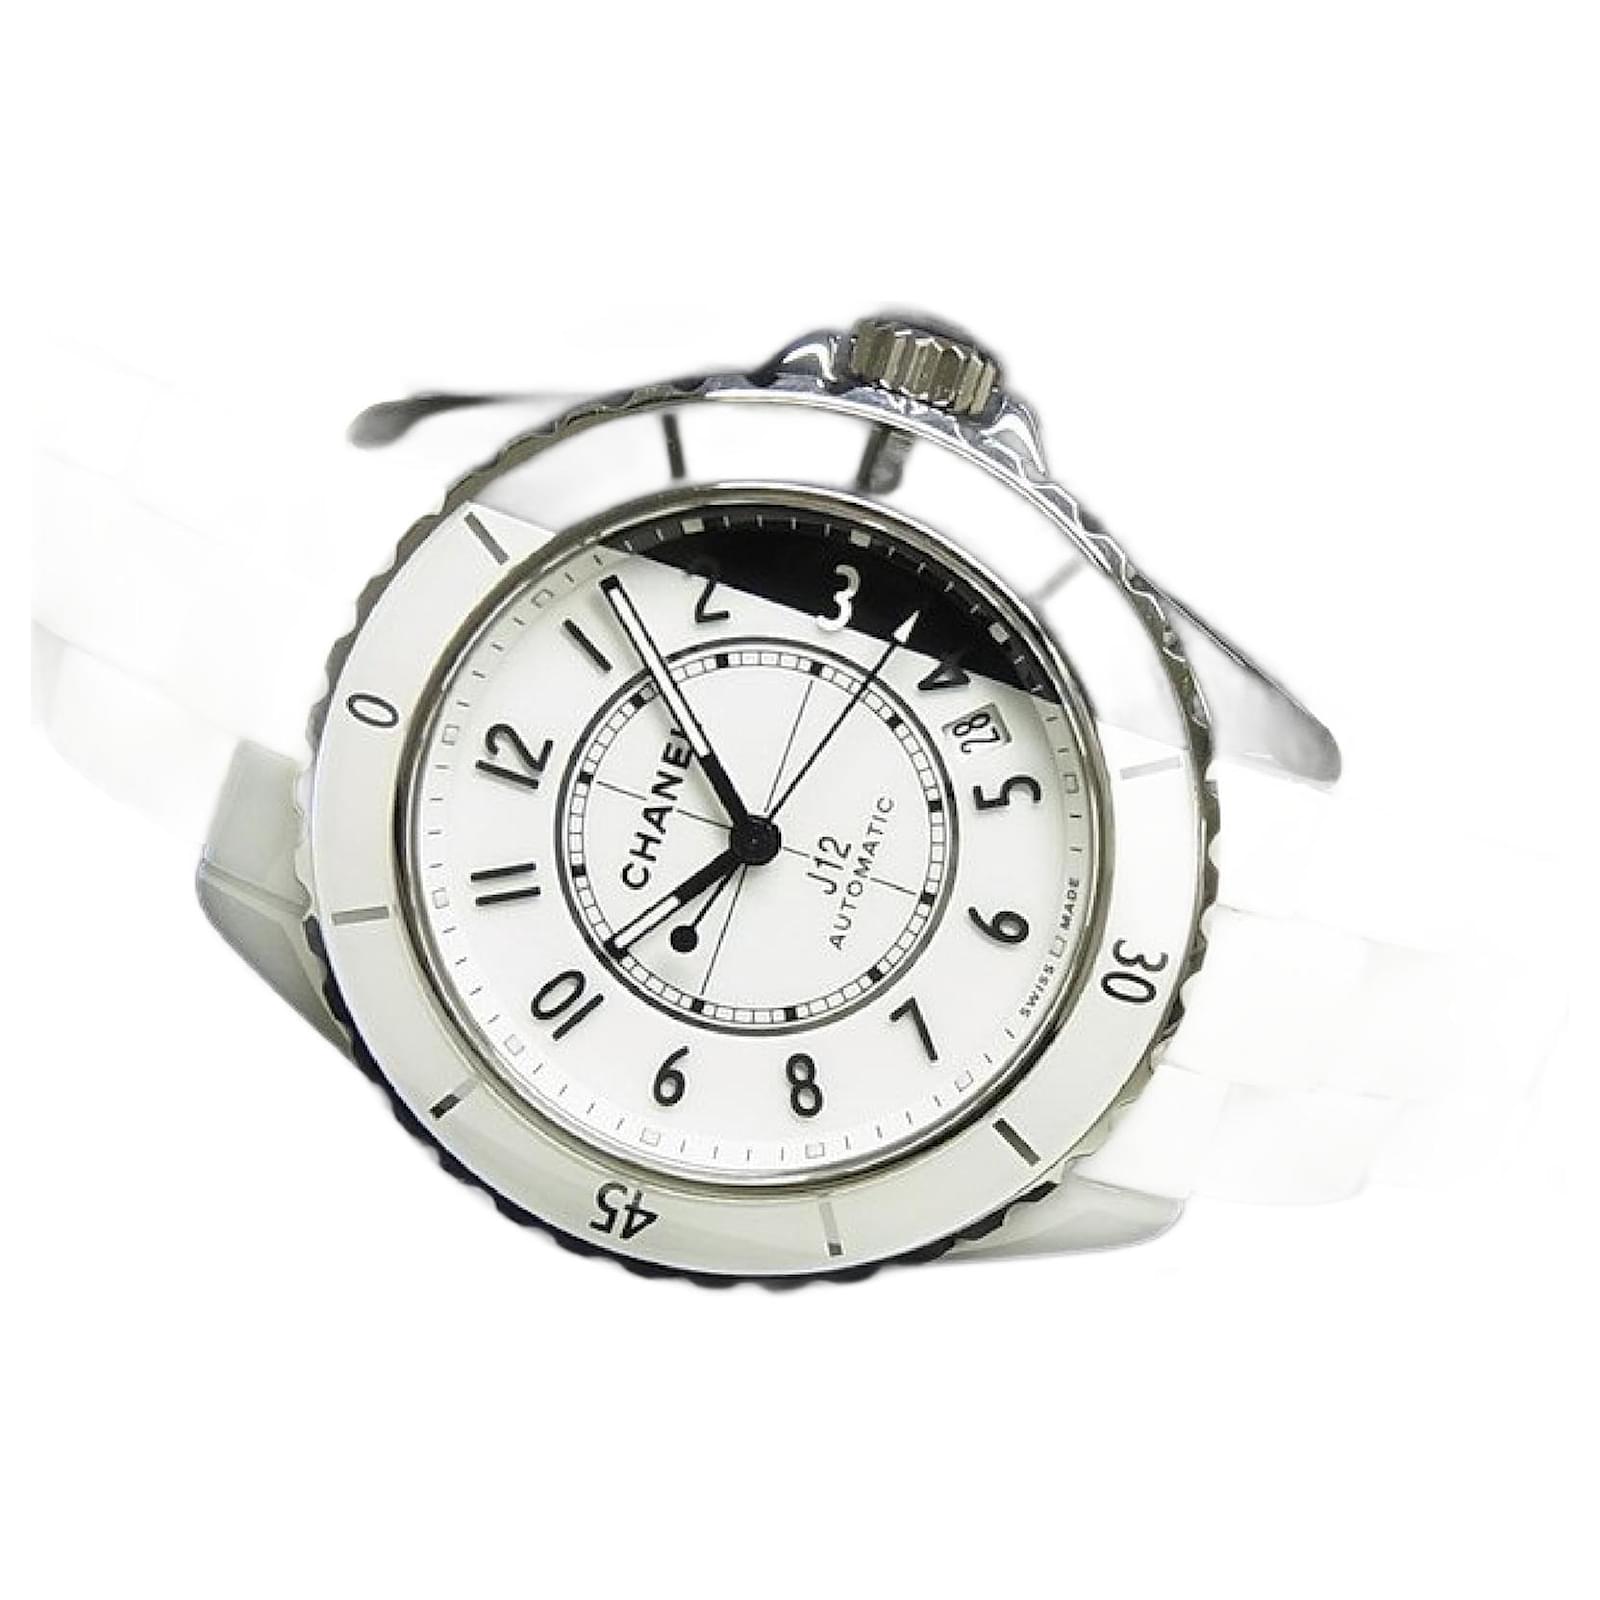 Automatic Watches Chanel Chanel J12 Paradoxe 38 mm White & Black Ceramic H6515 Mens